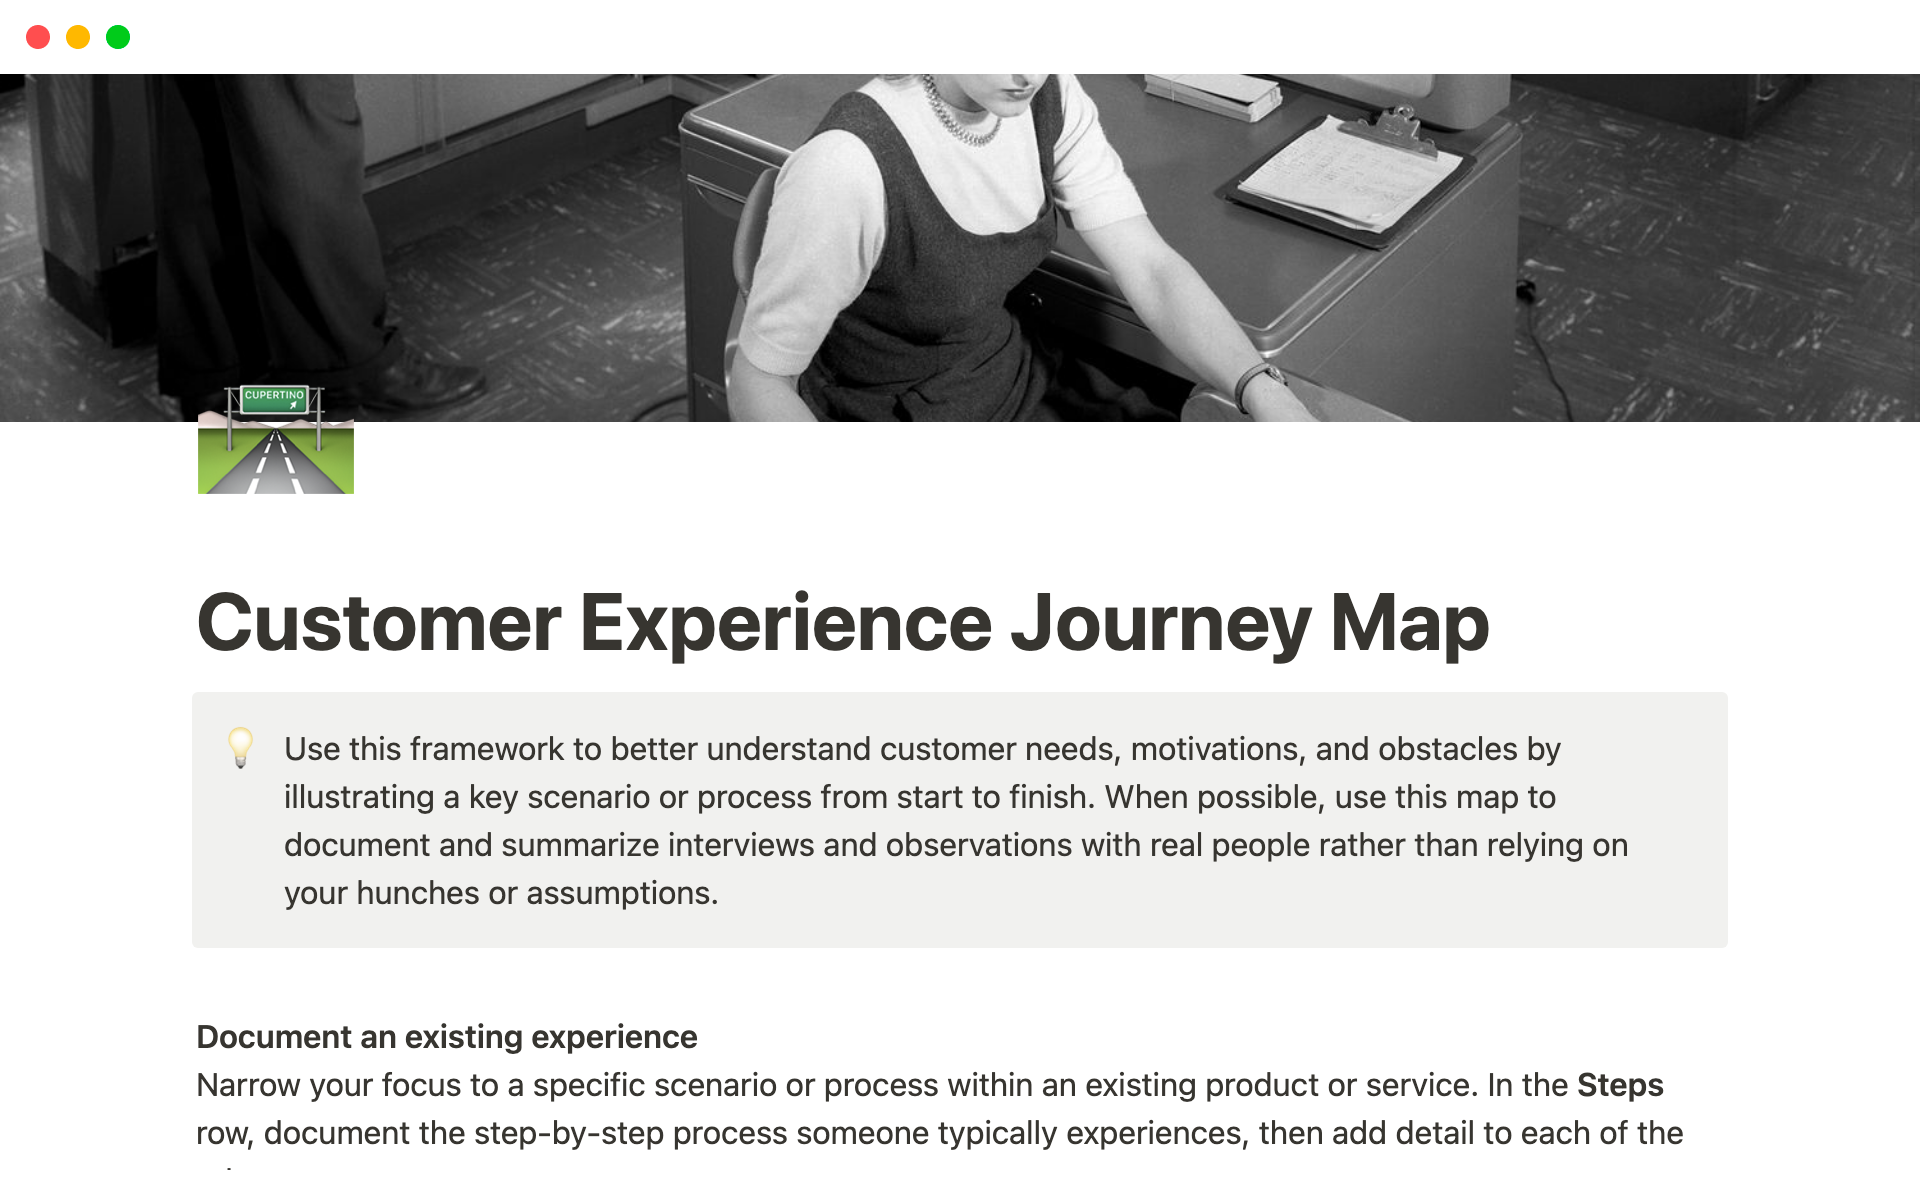 Customer Experience Journey Map helps to better understand customer needs, motivations, and obstacles by illustrating a key scenario or process from start to finish.